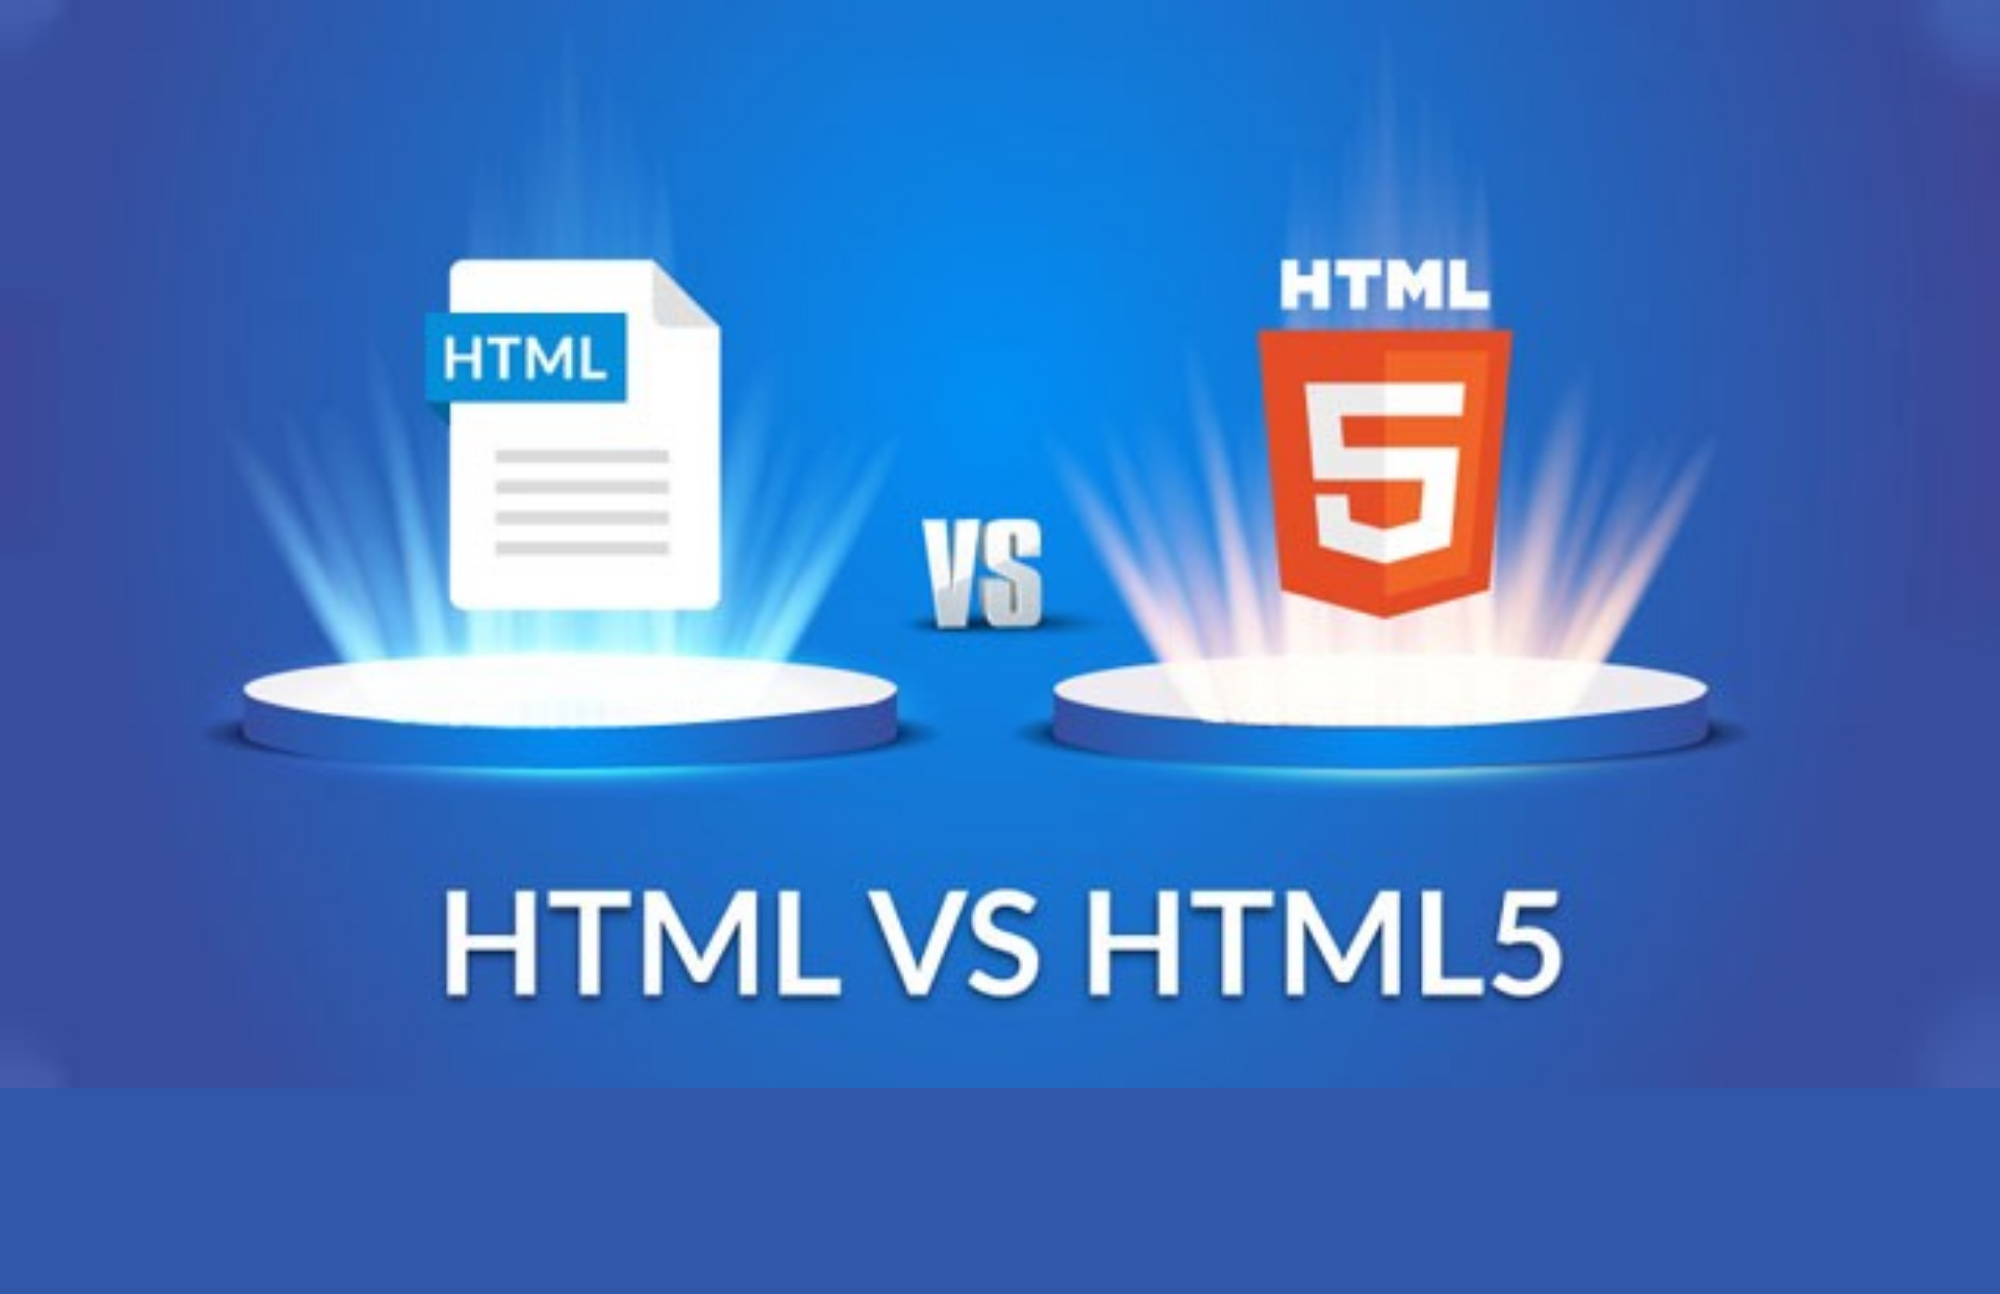 An HTML logo on the left side and an HTML5 logo on the right side